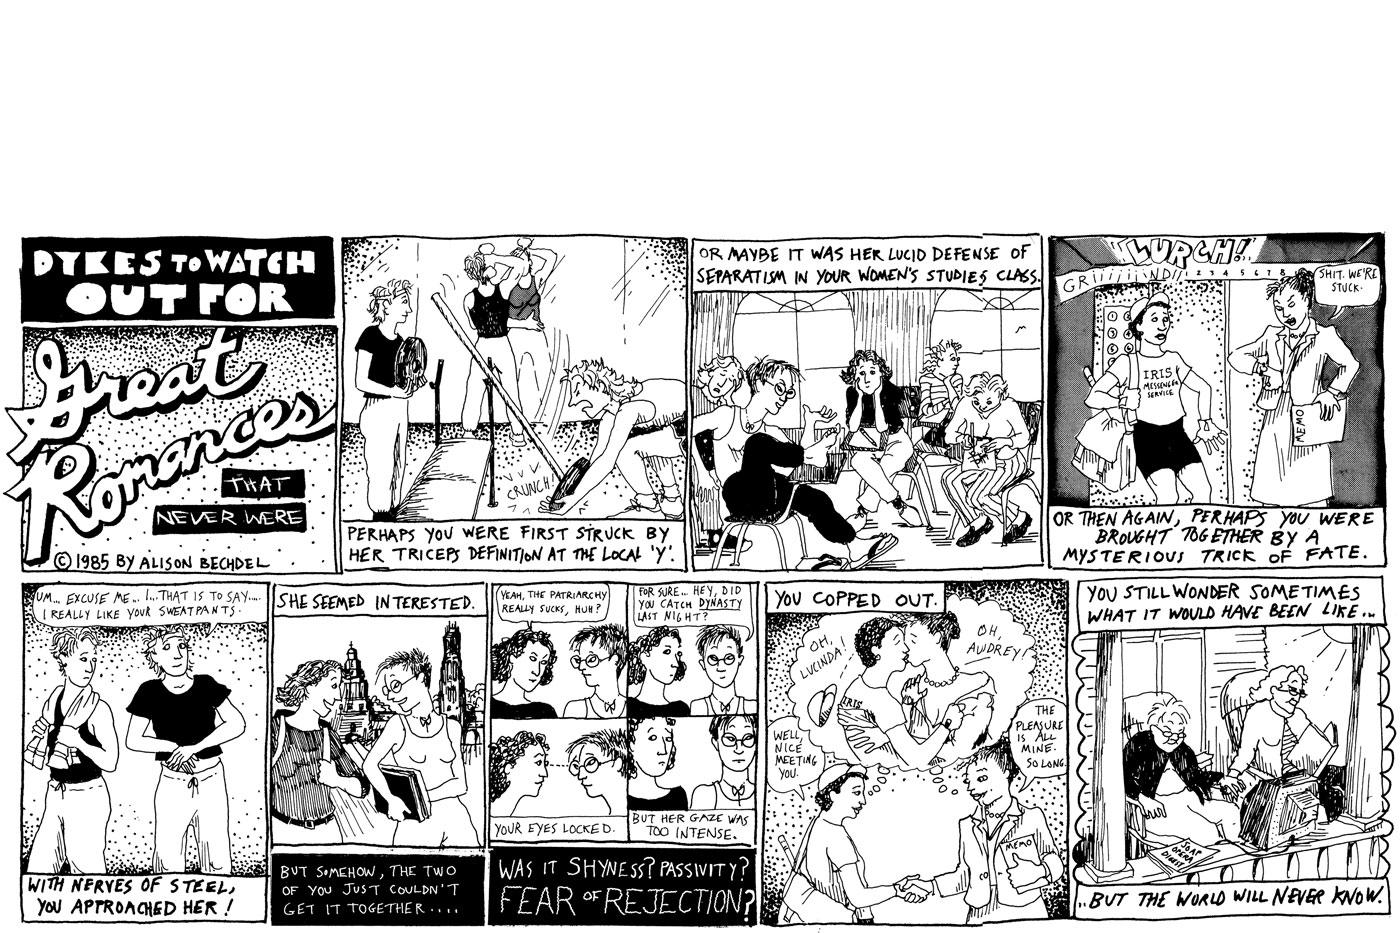 Dykes To Watch Out For, “Great Romances That Never Were.” 1985